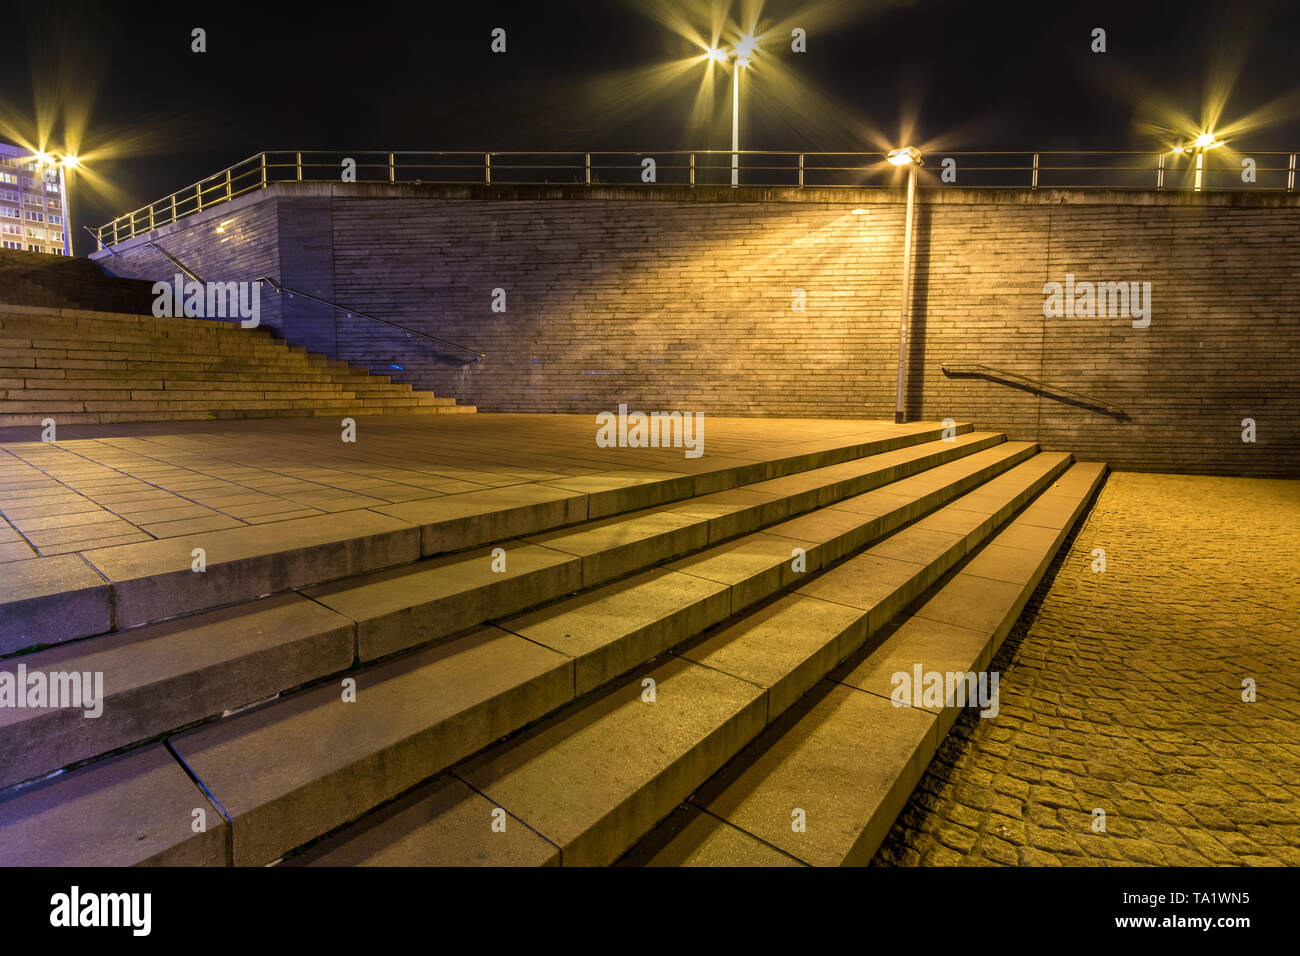 City lights at night on a large staircase Stock Photo